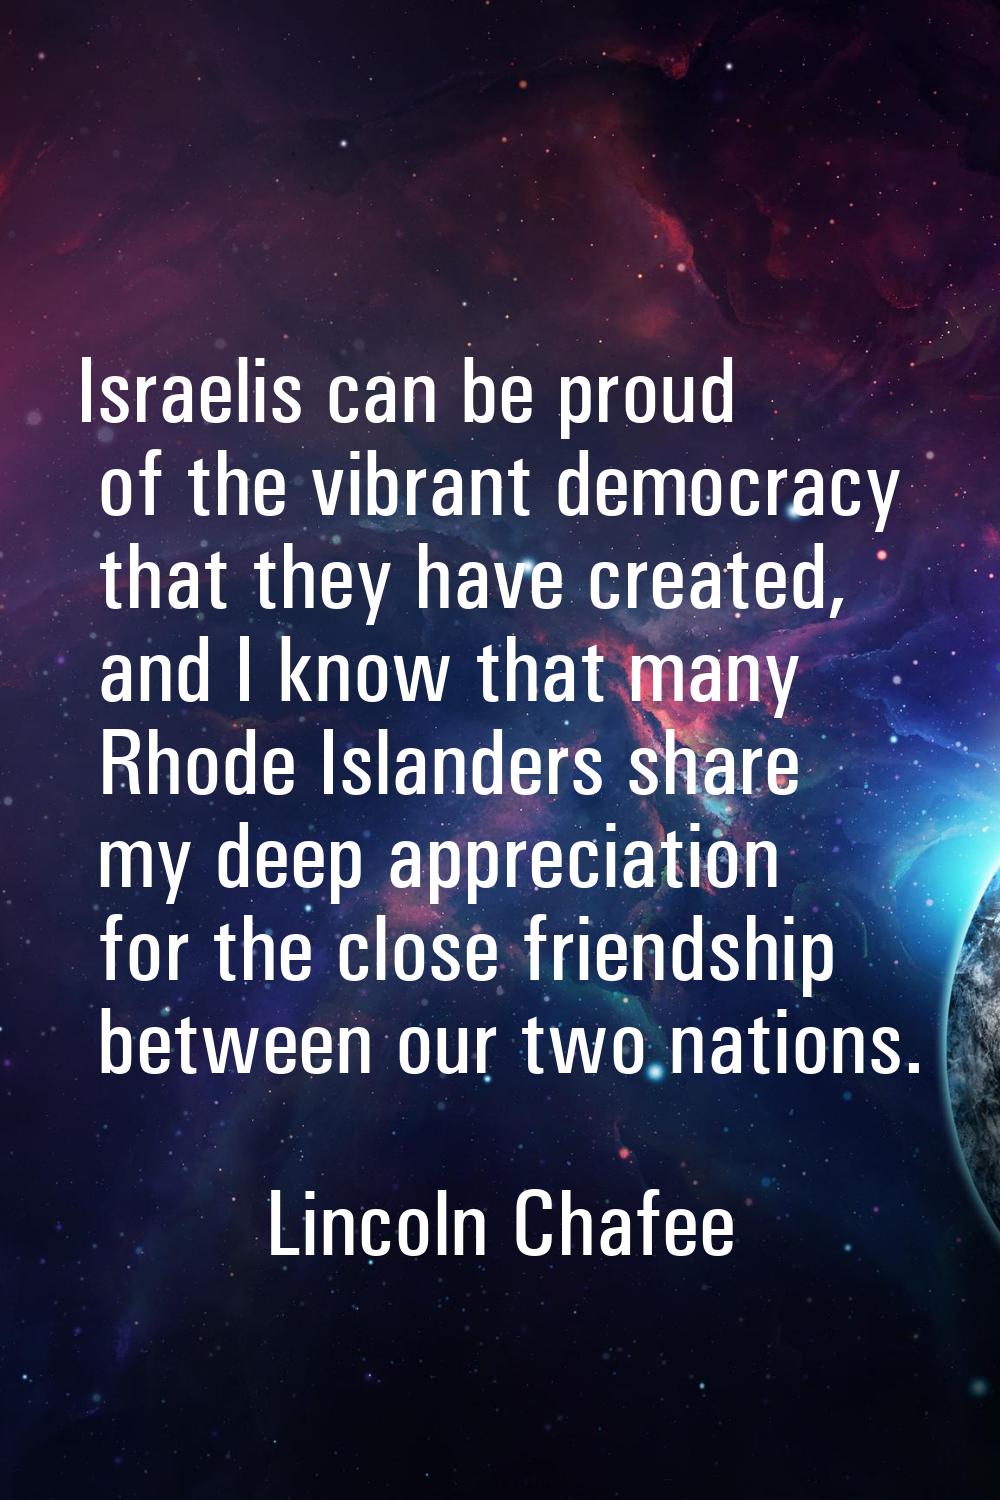 Israelis can be proud of the vibrant democracy that they have created, and I know that many Rhode I